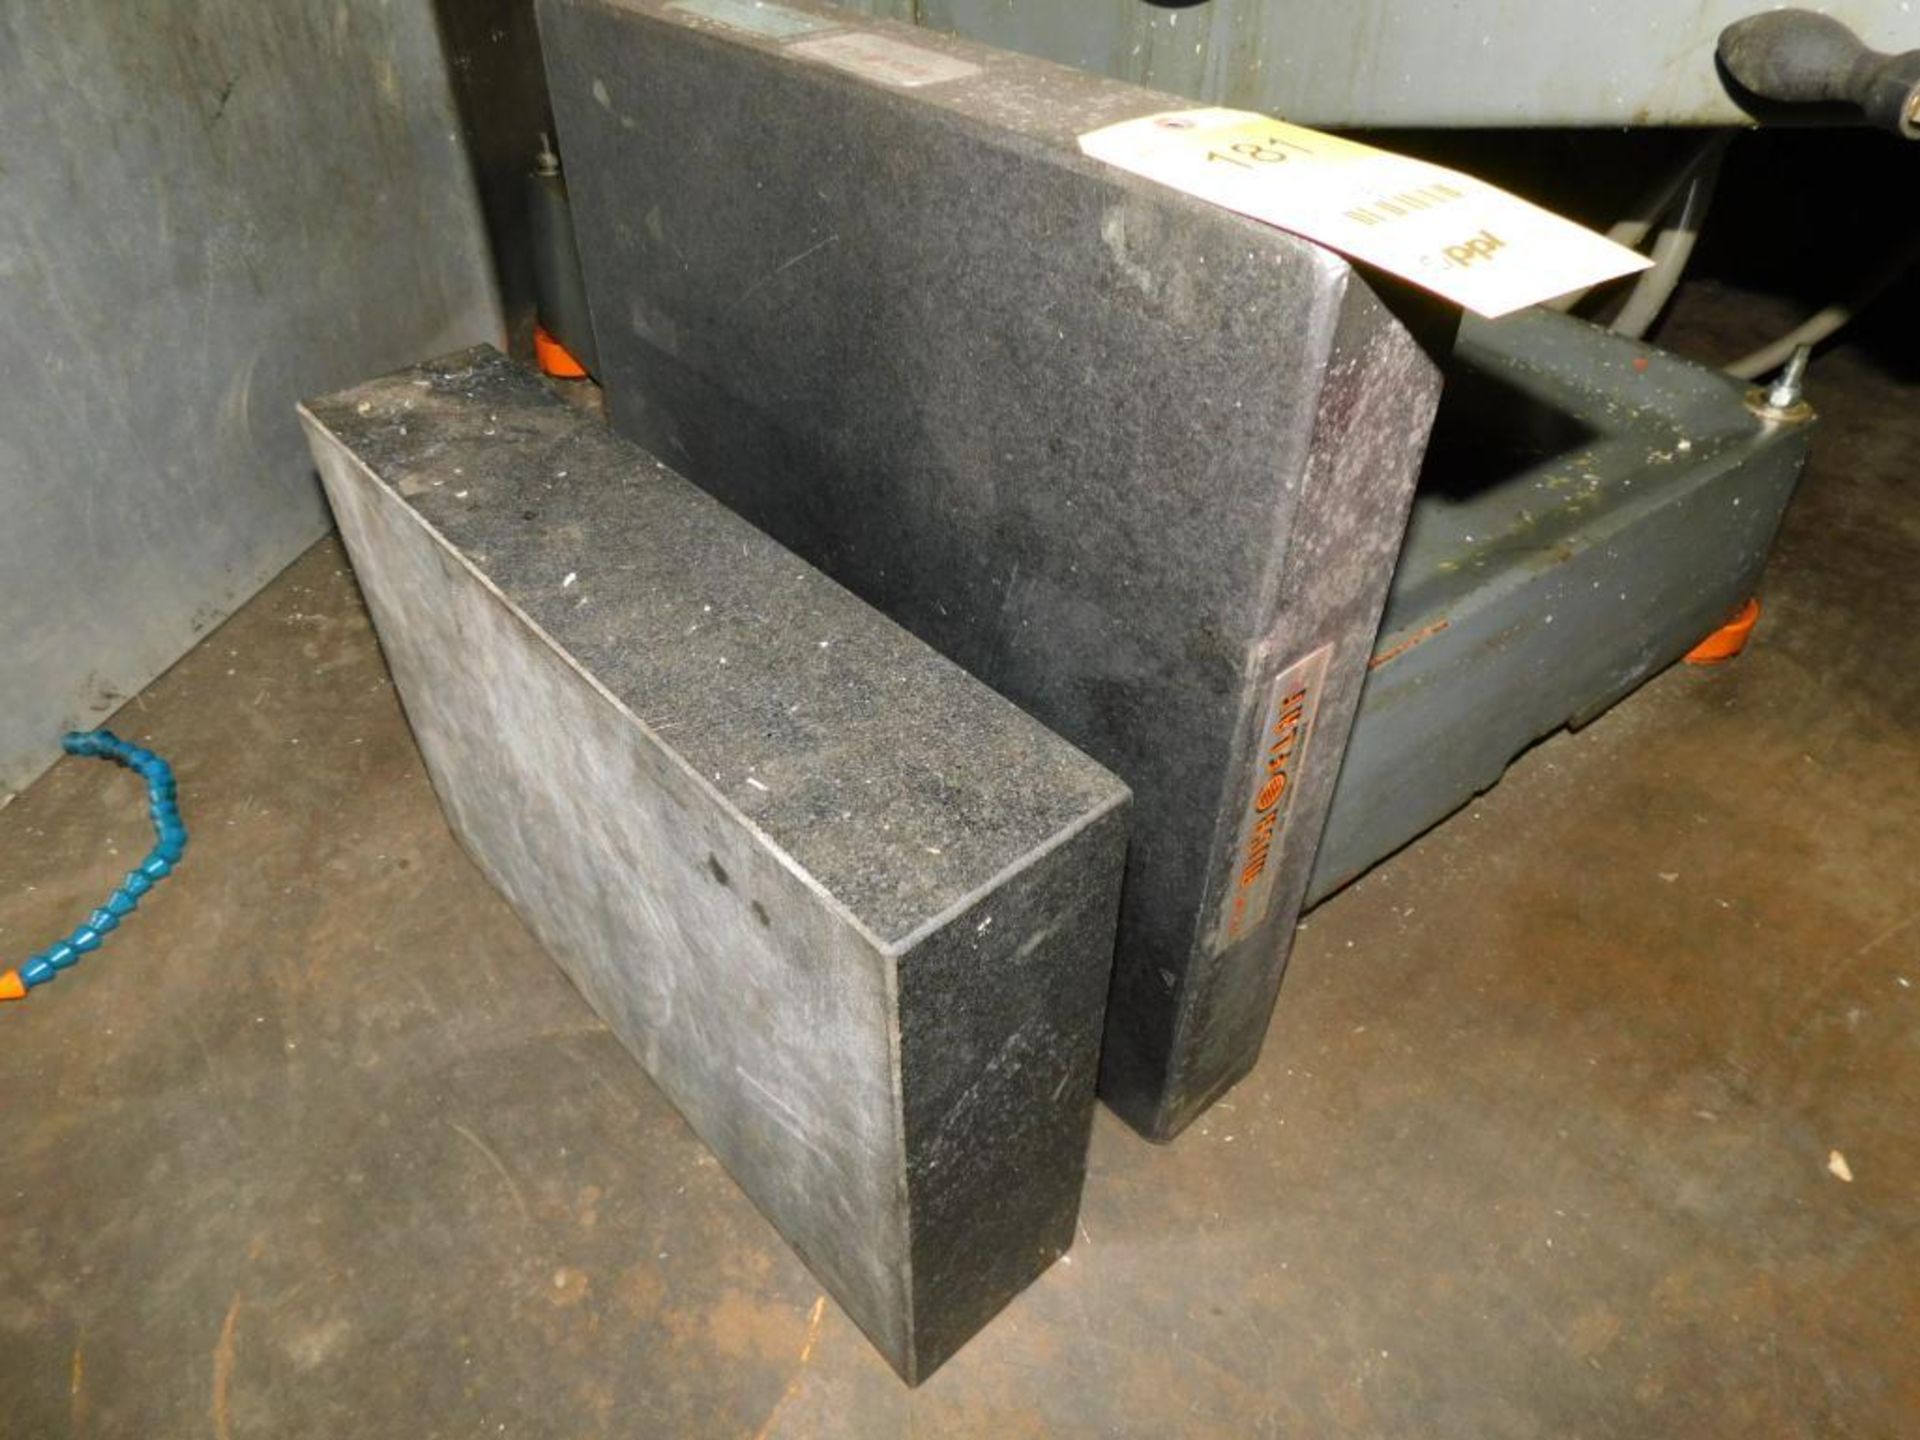 LOT: (1) Collins Microflat 18" x 18" Granite Surface Plate, (1) 18" x 13" Granite Surface Plate